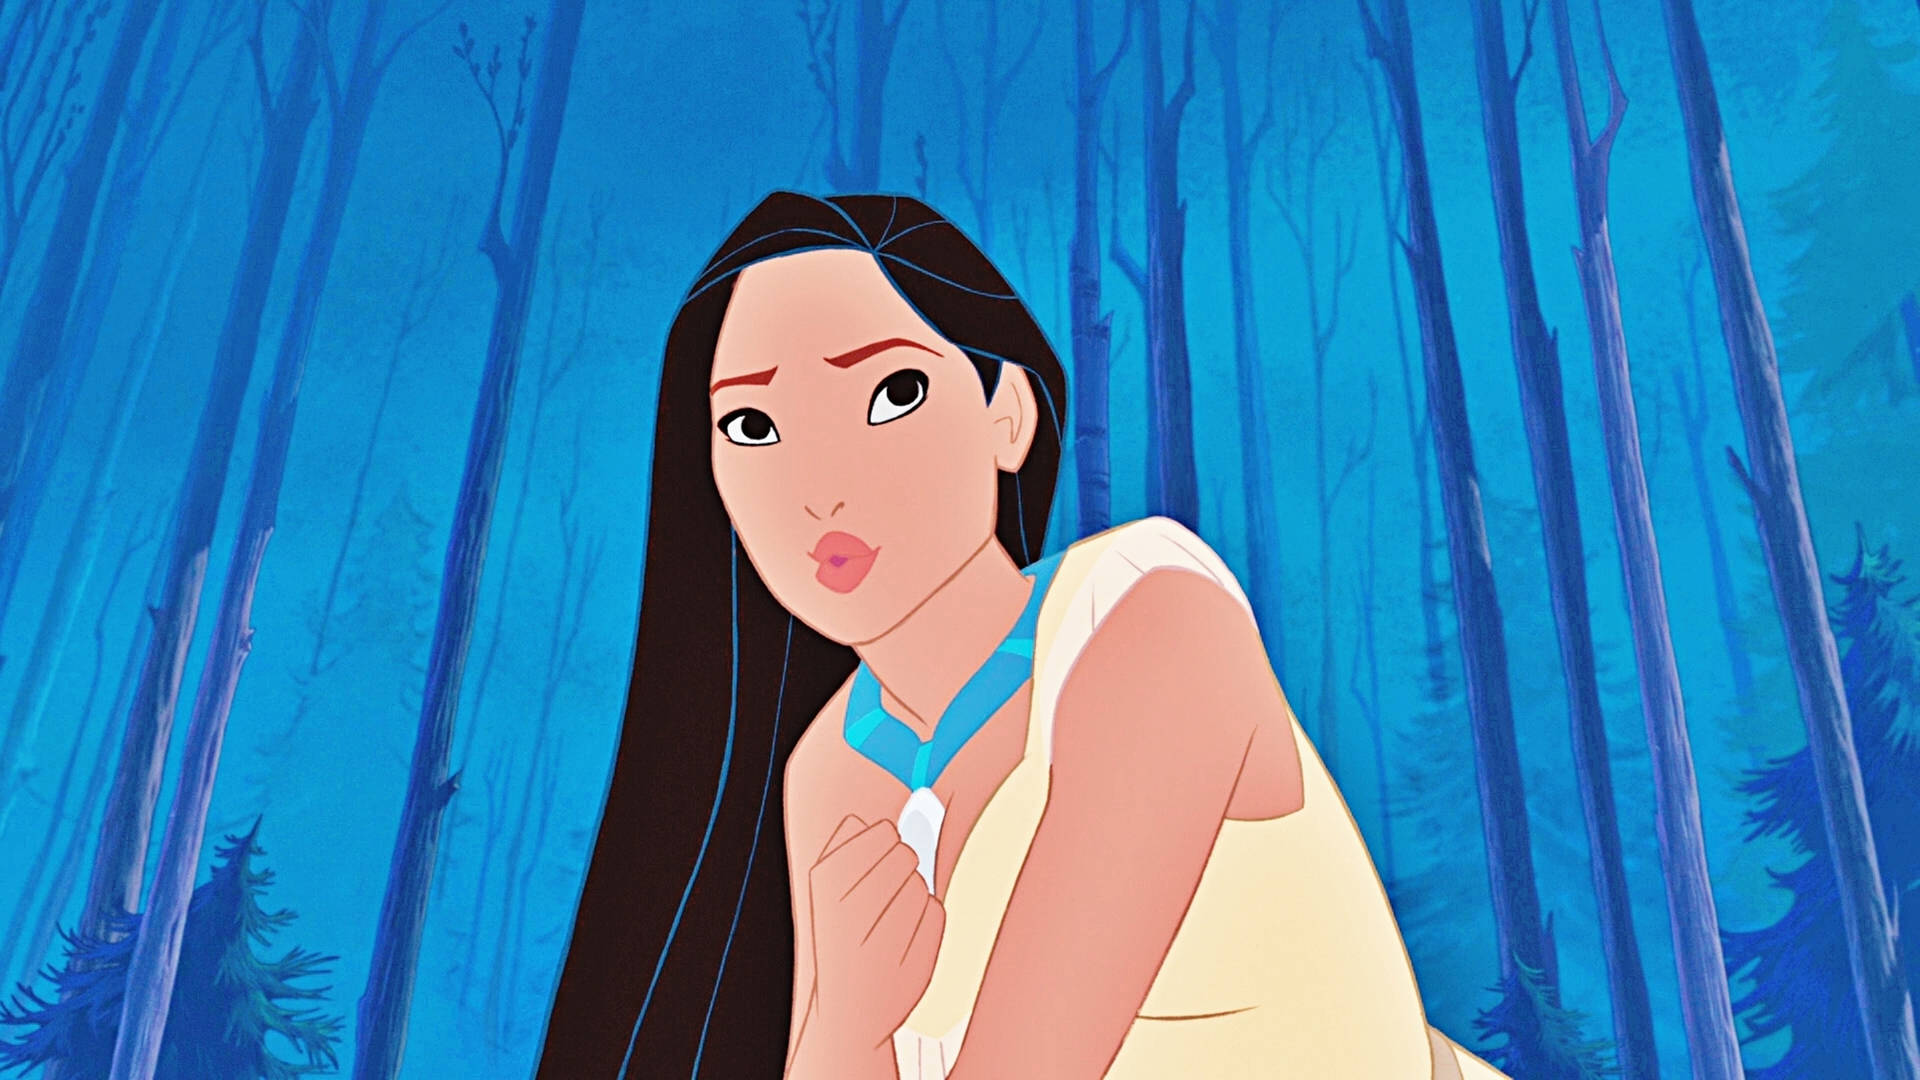 Pocahontas With Her Lips Pursed